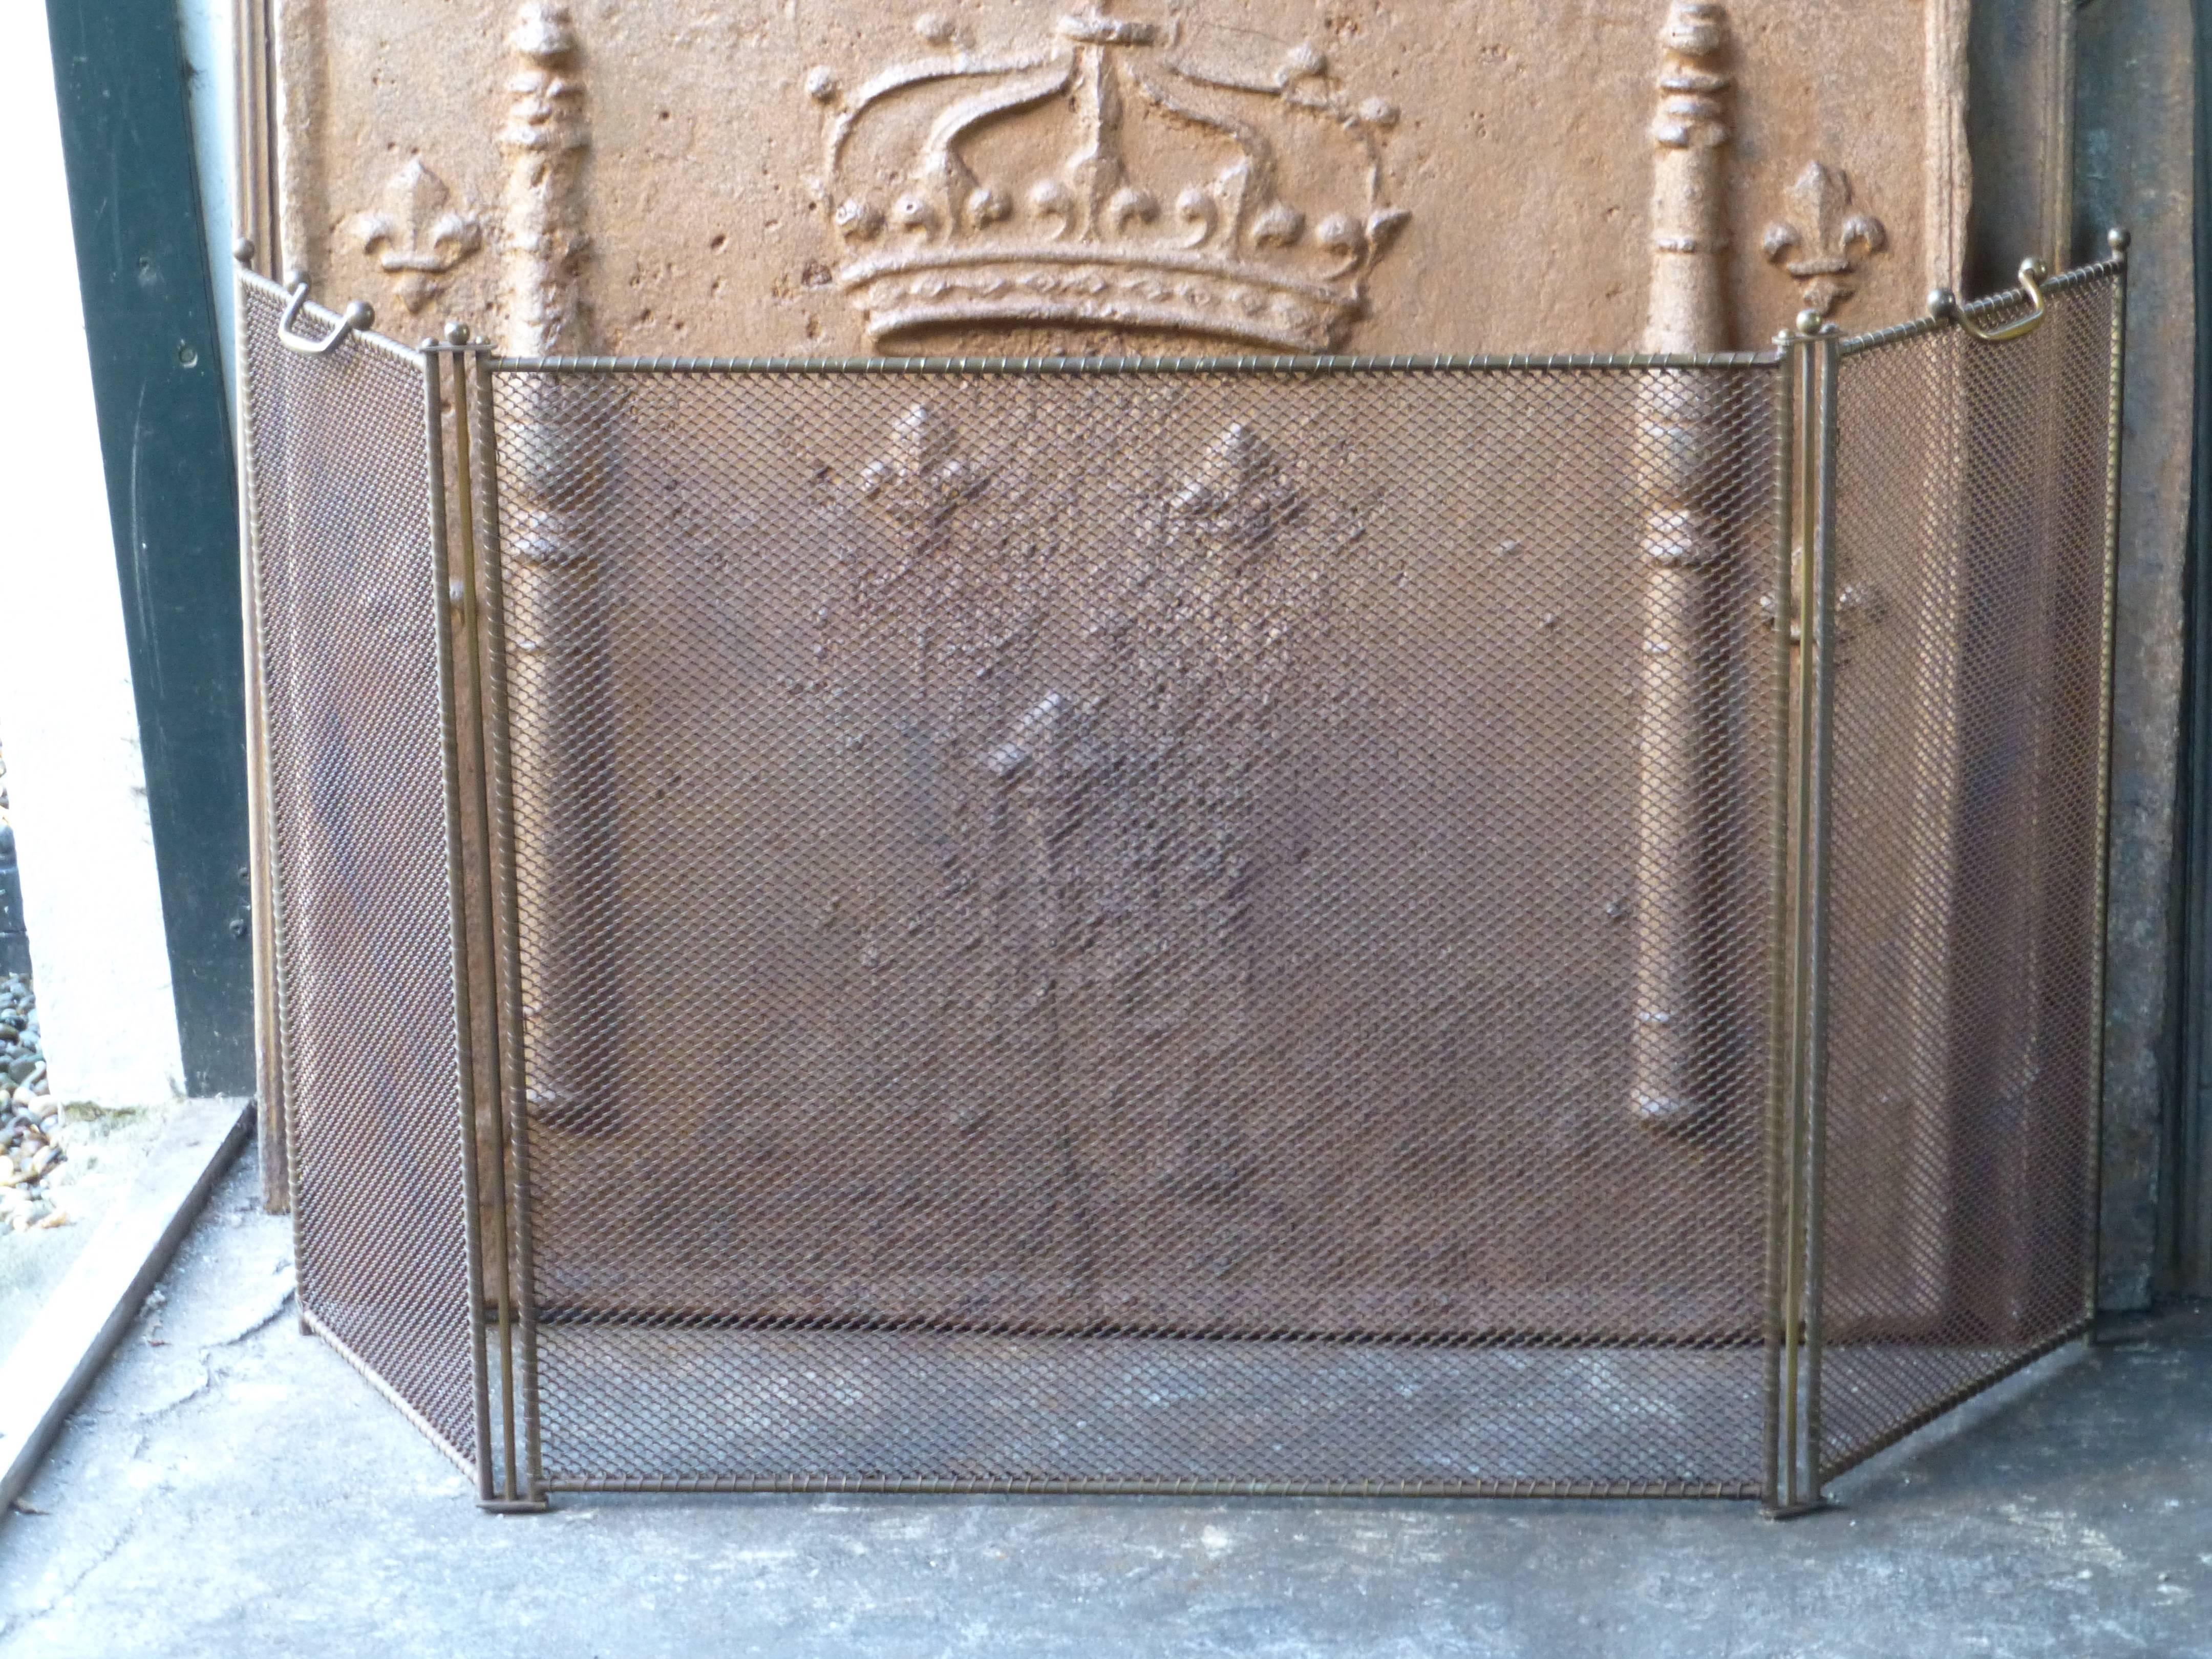 19th century French fireplace screen made of iron and iron mesh.